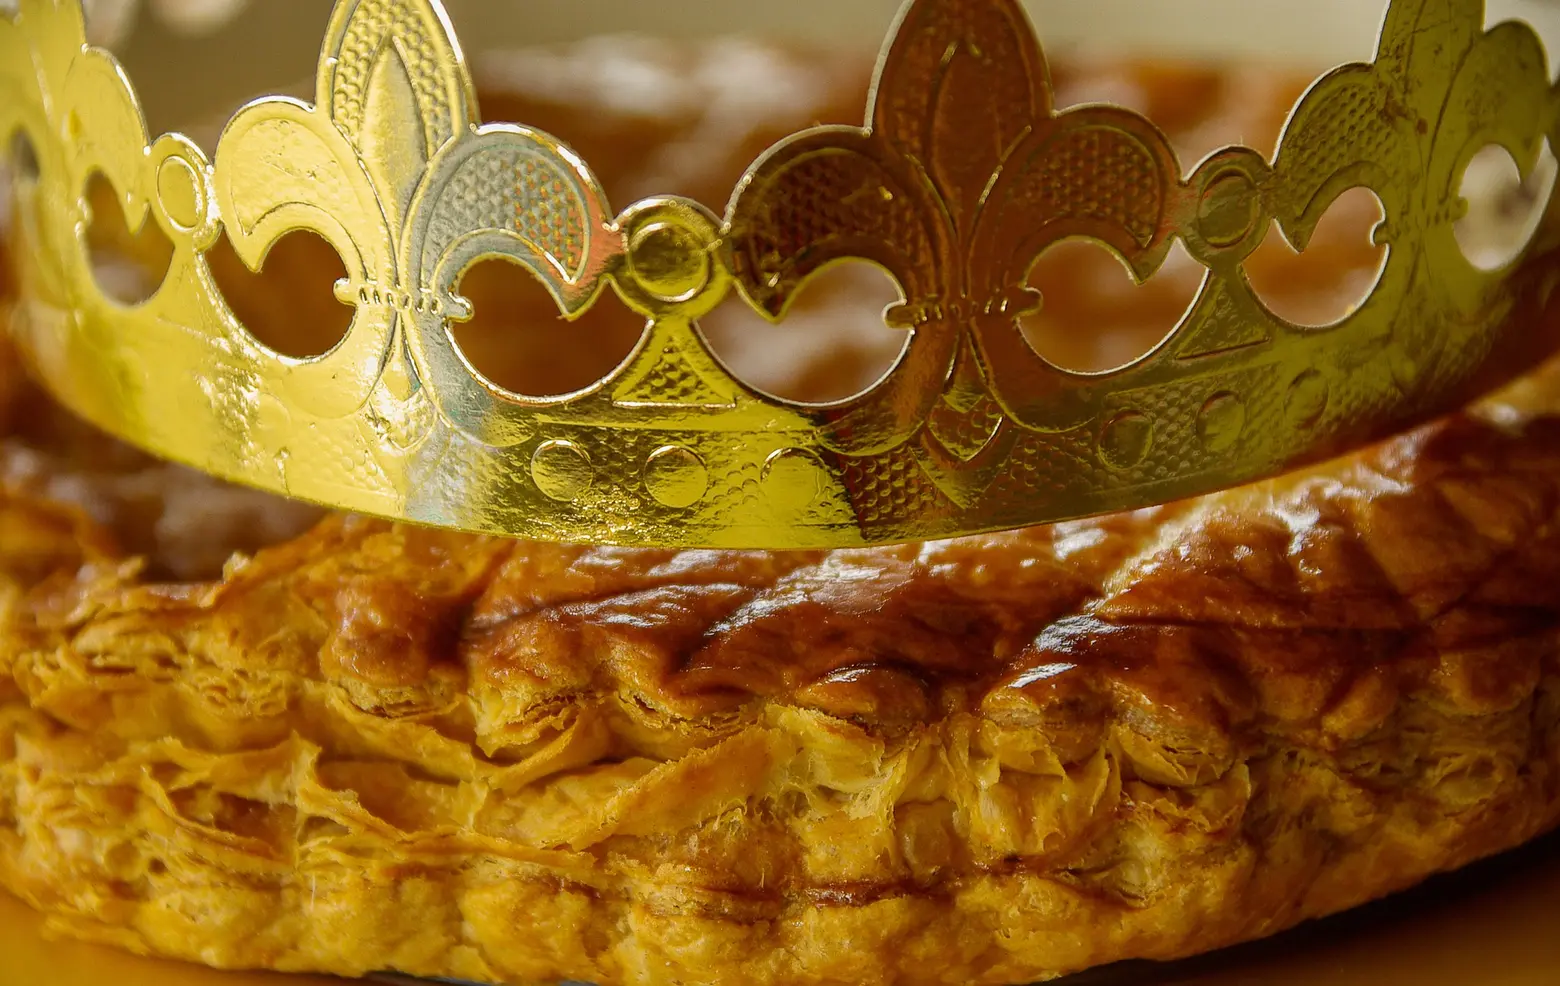 21 places to celebrate Mardi Gras and eat King Cake in NYC